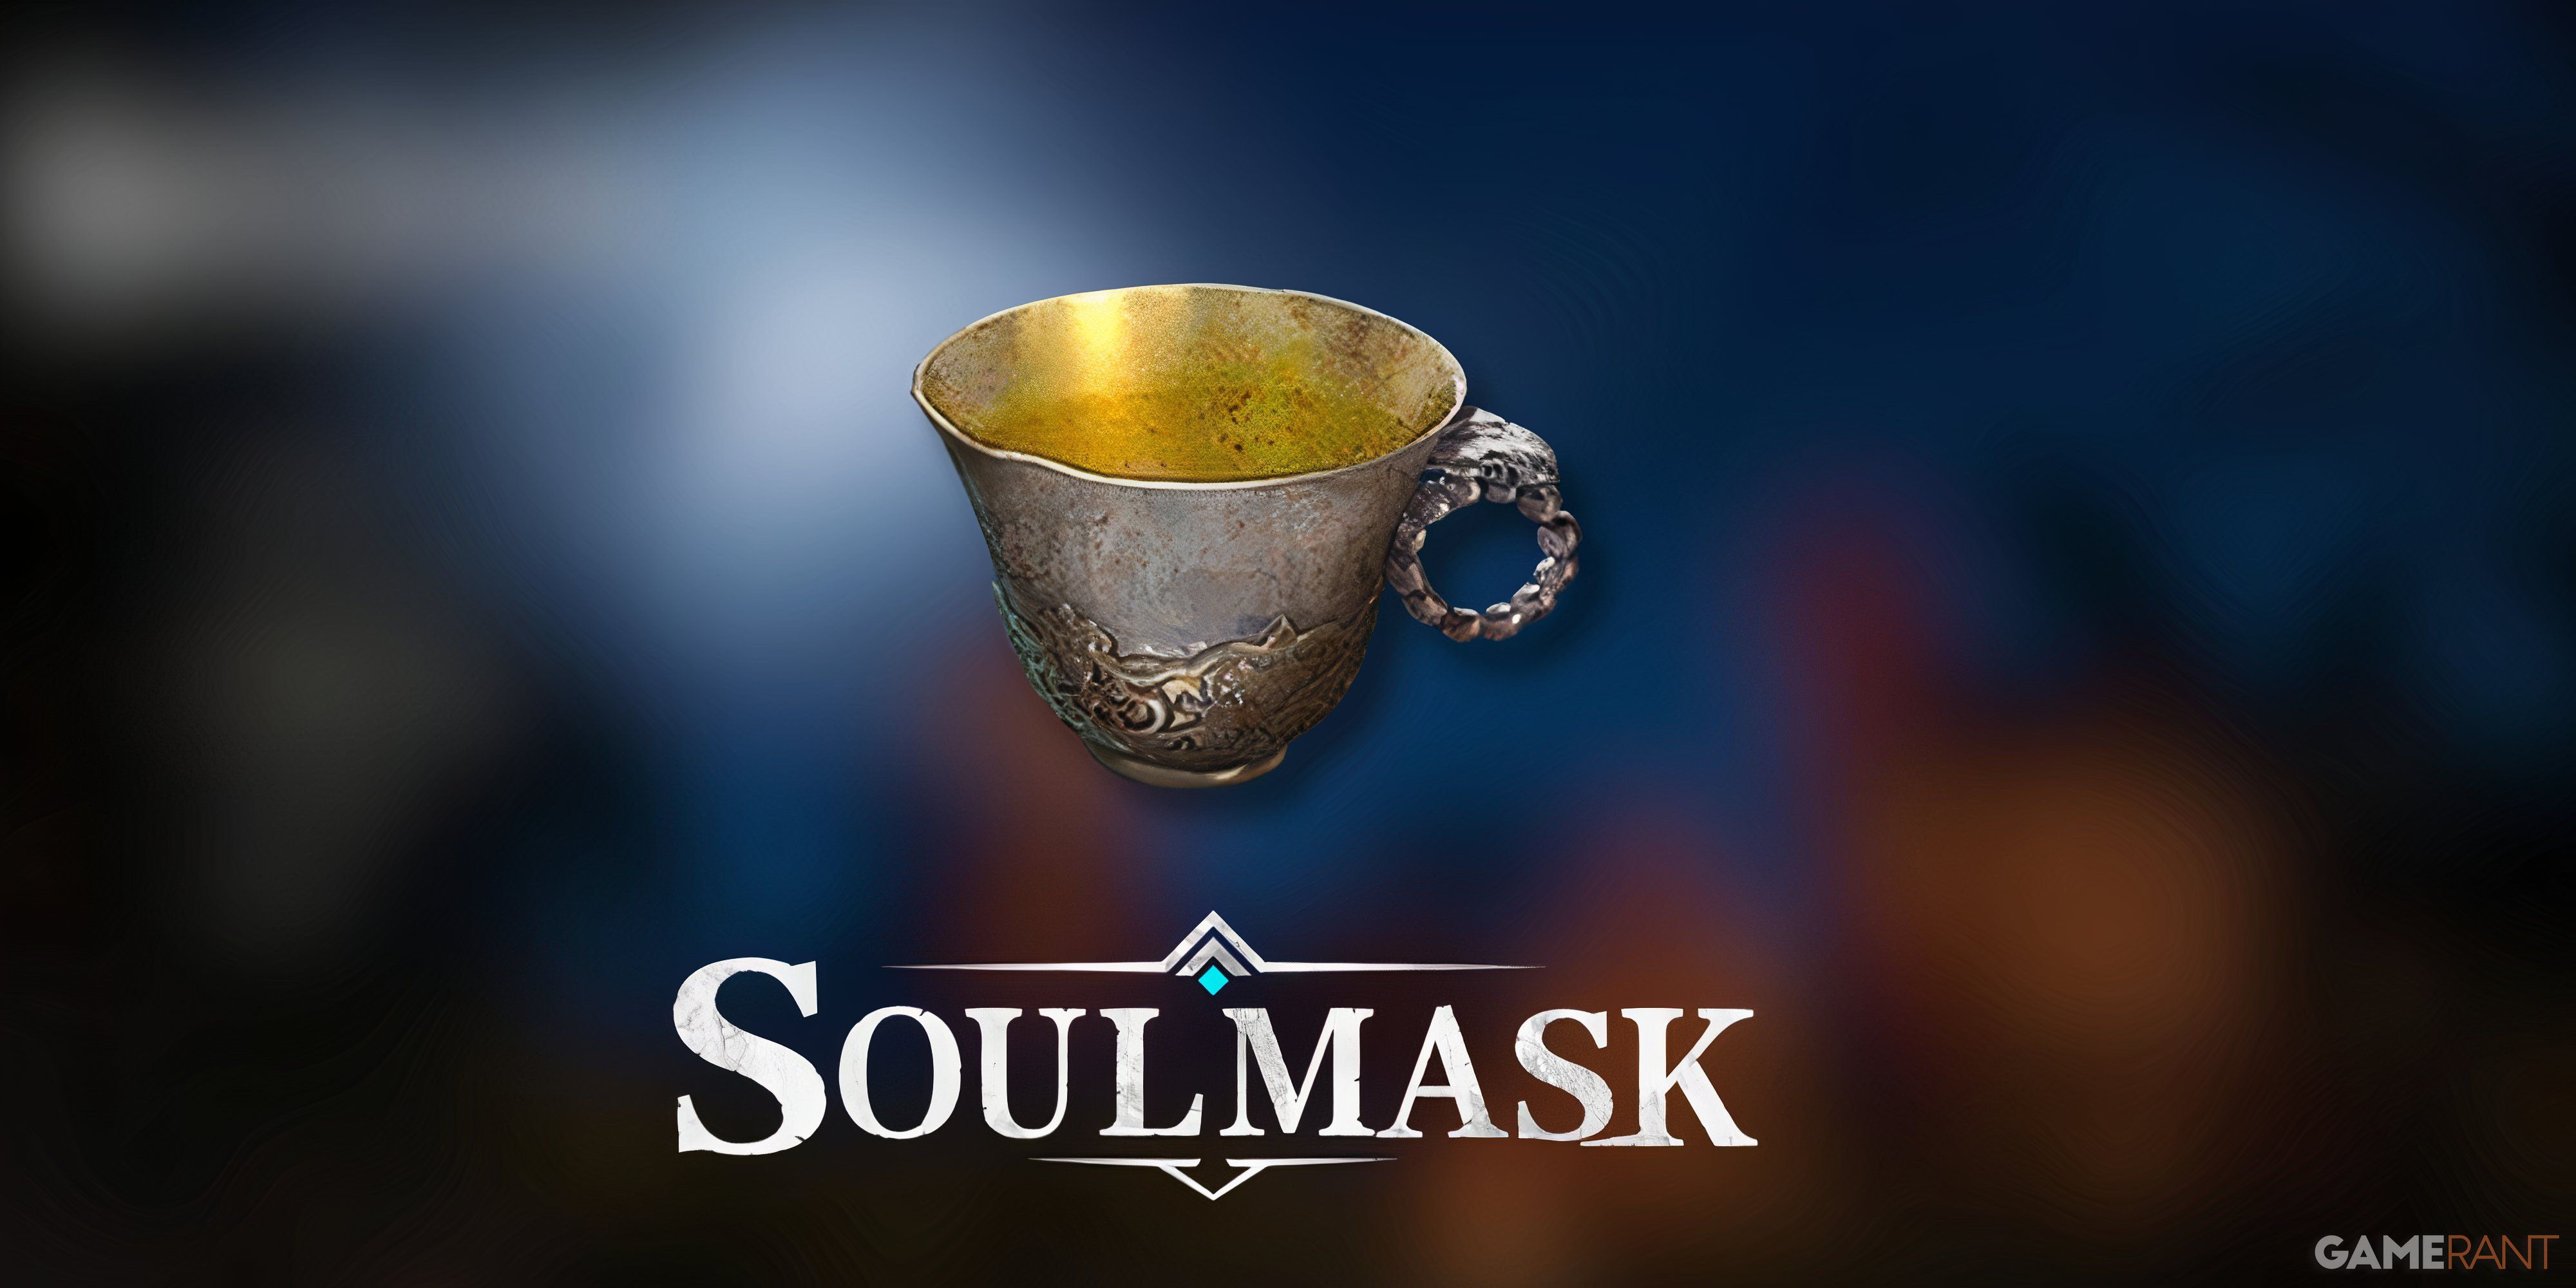 Soulmask - Worship Container